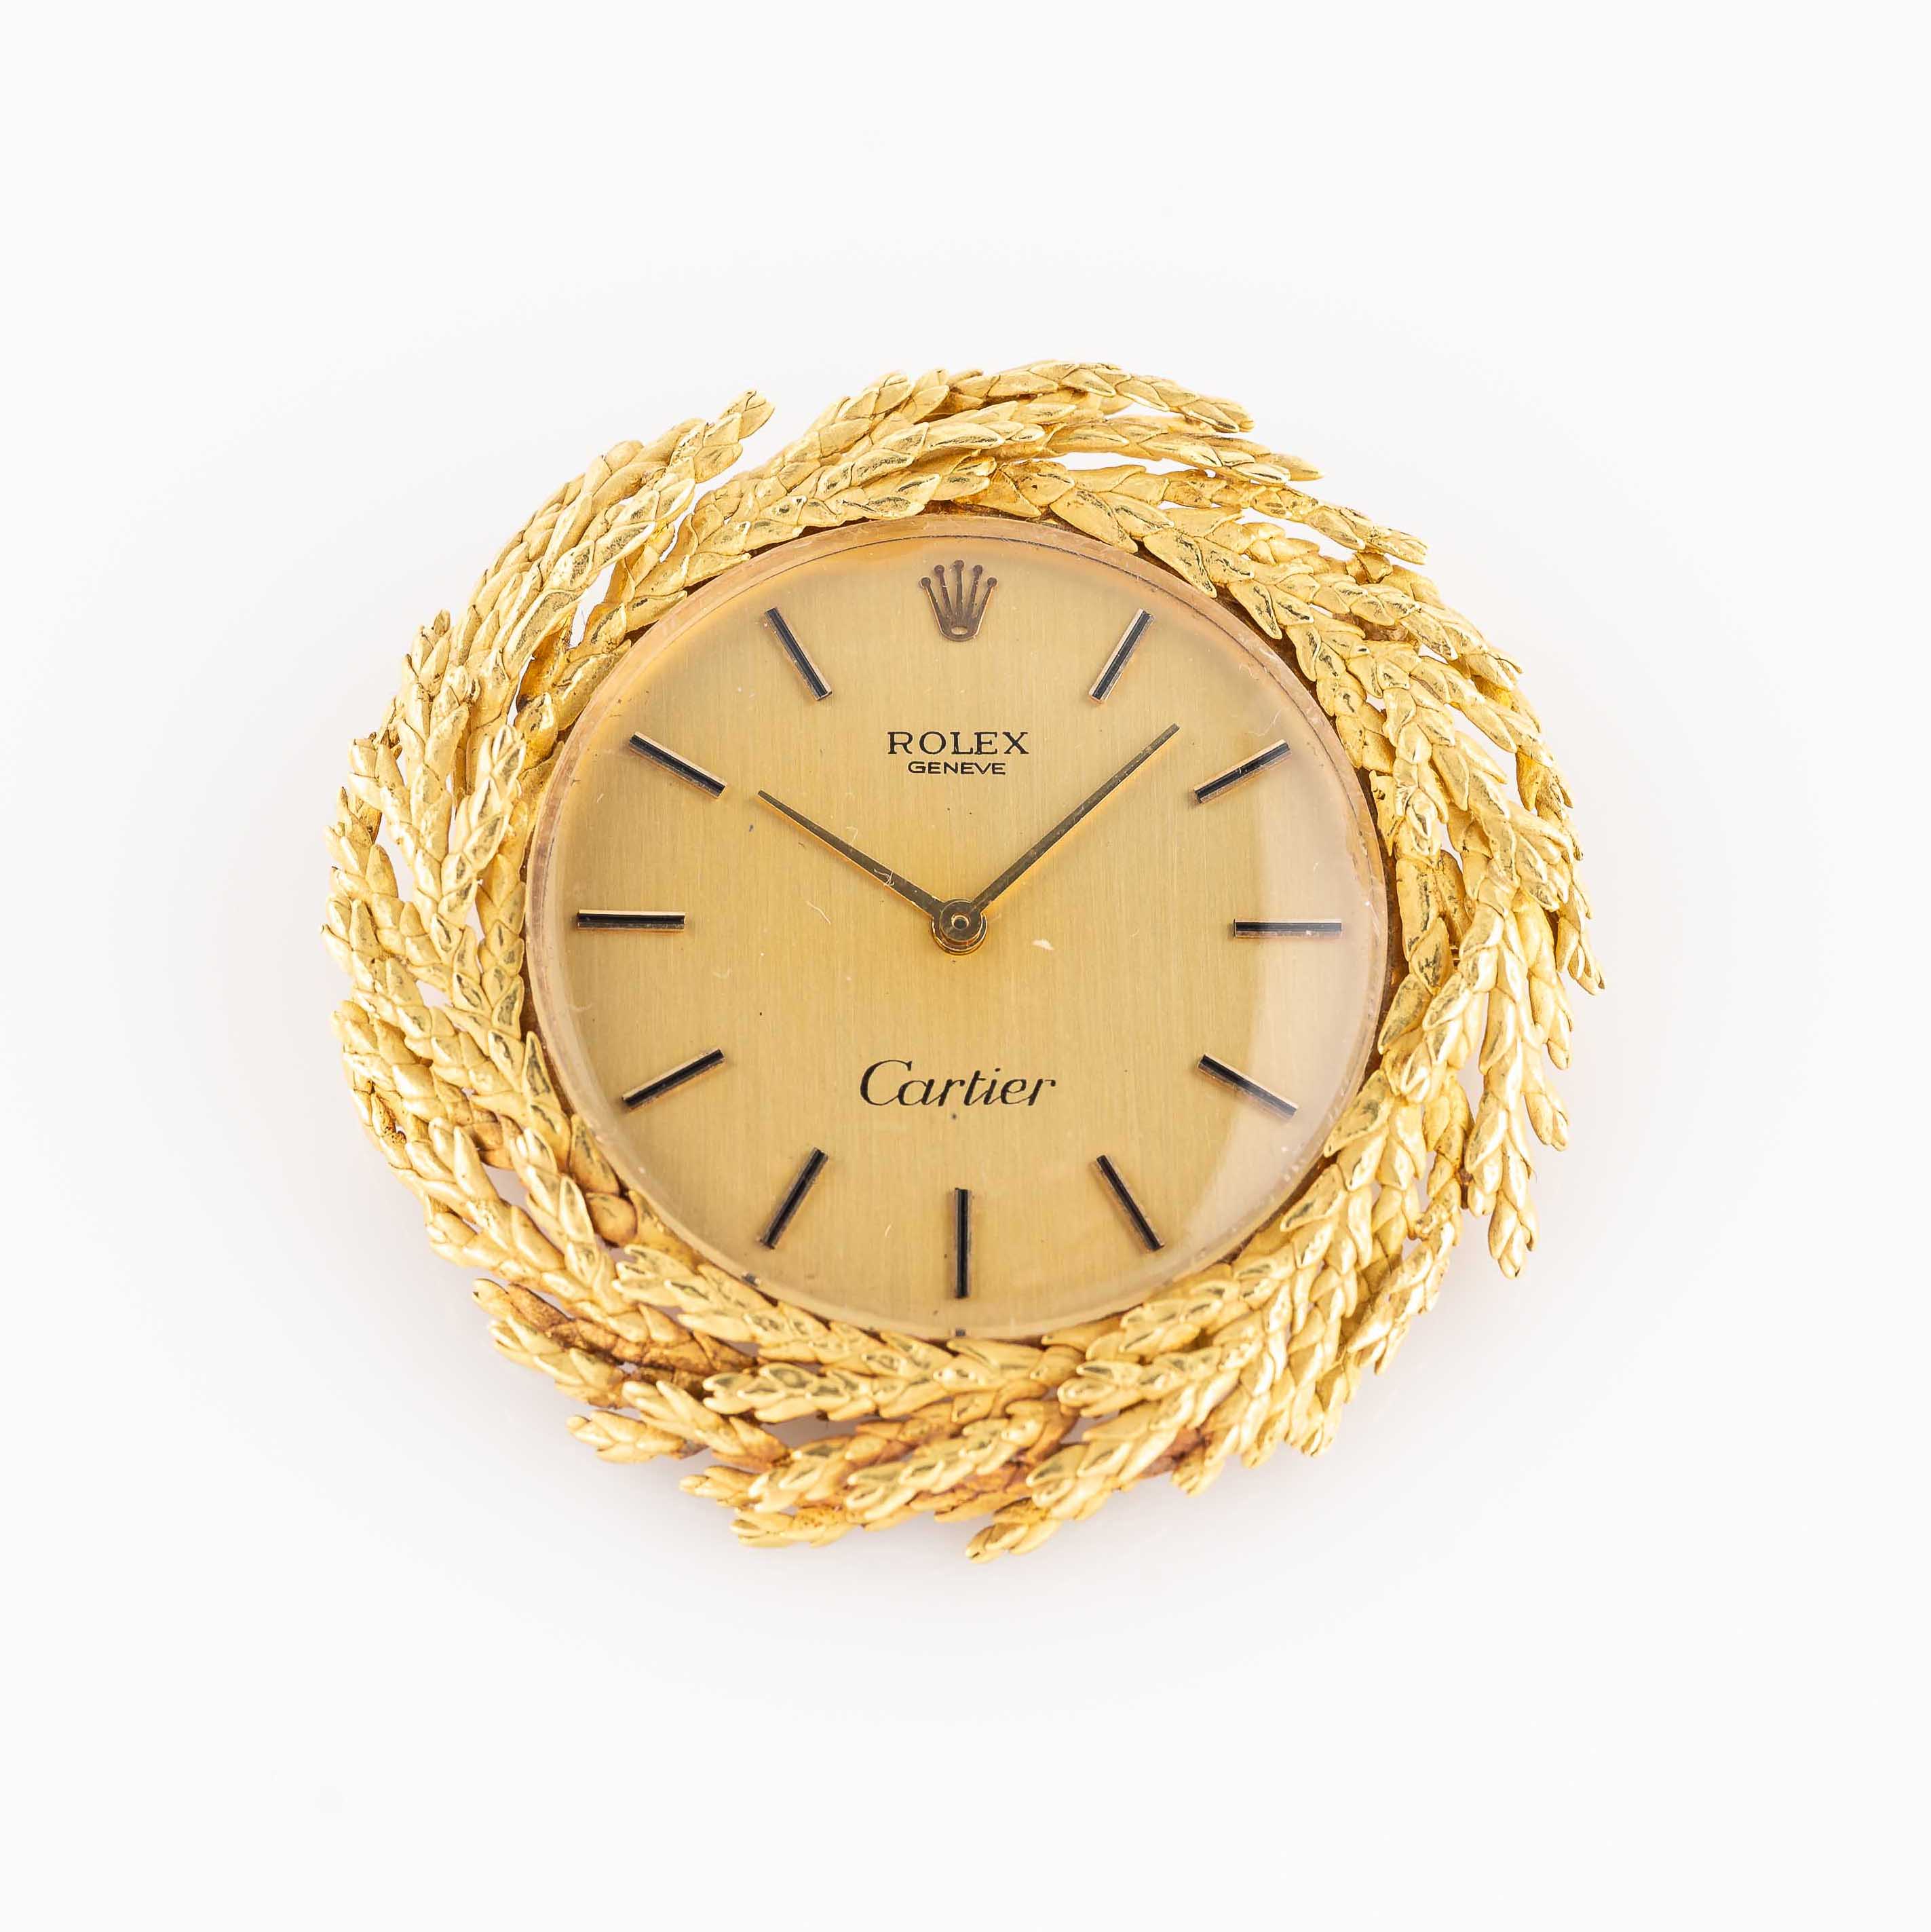 A RARE SOLID GOLD ROLEX BROACH WATCH CIRCA 1970s, ORIGINALLY RETAILED BY CARTIER WITH CO-SIGNED - Image 5 of 13